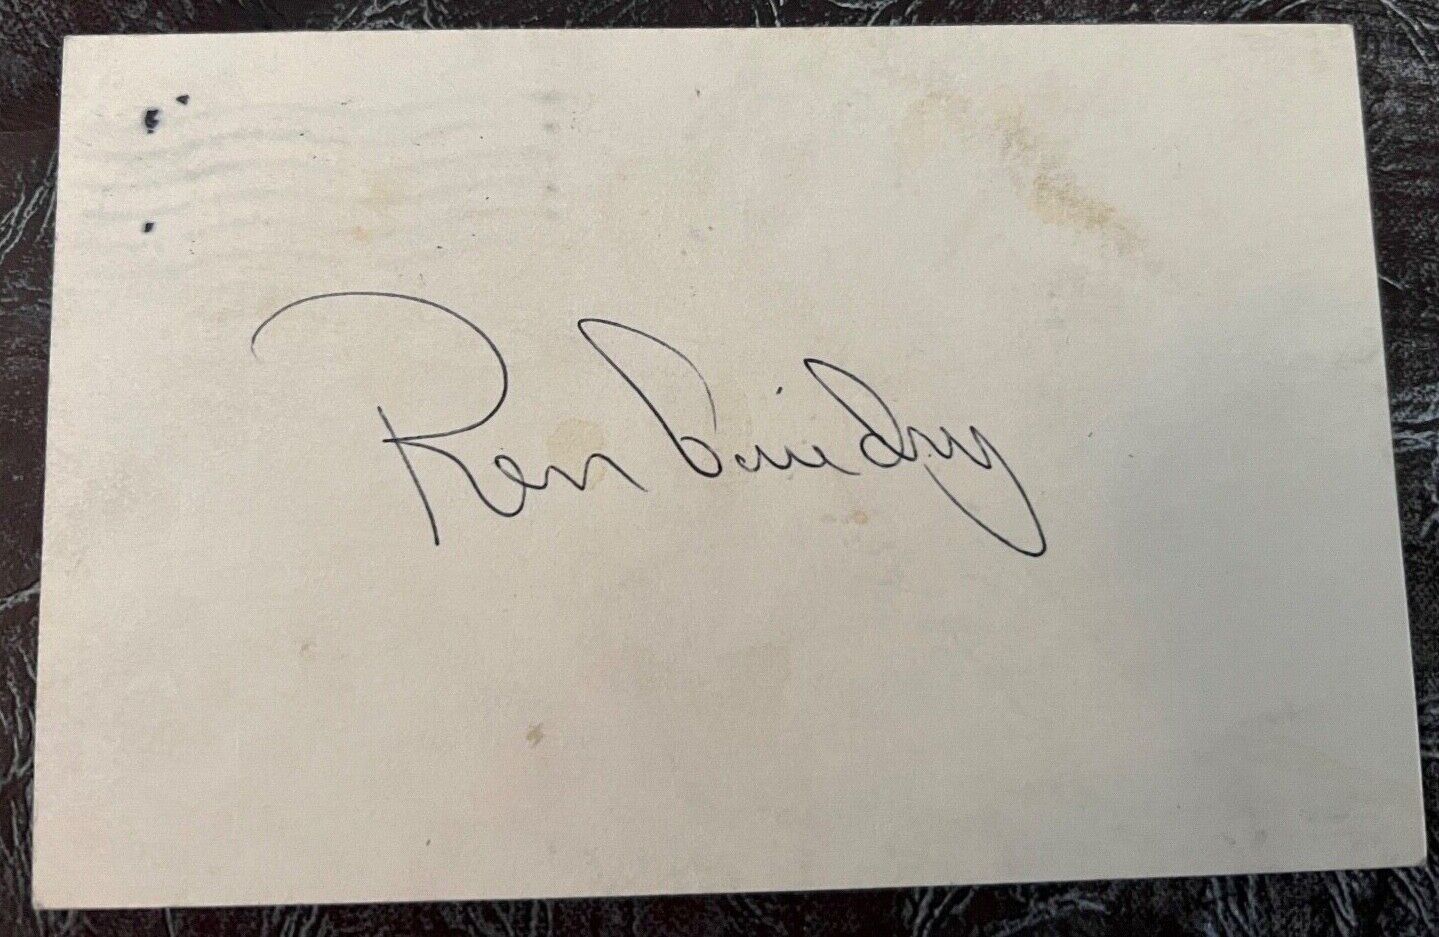 Ron Guidry - New York Yankees - Autographed 3x5 Index Card